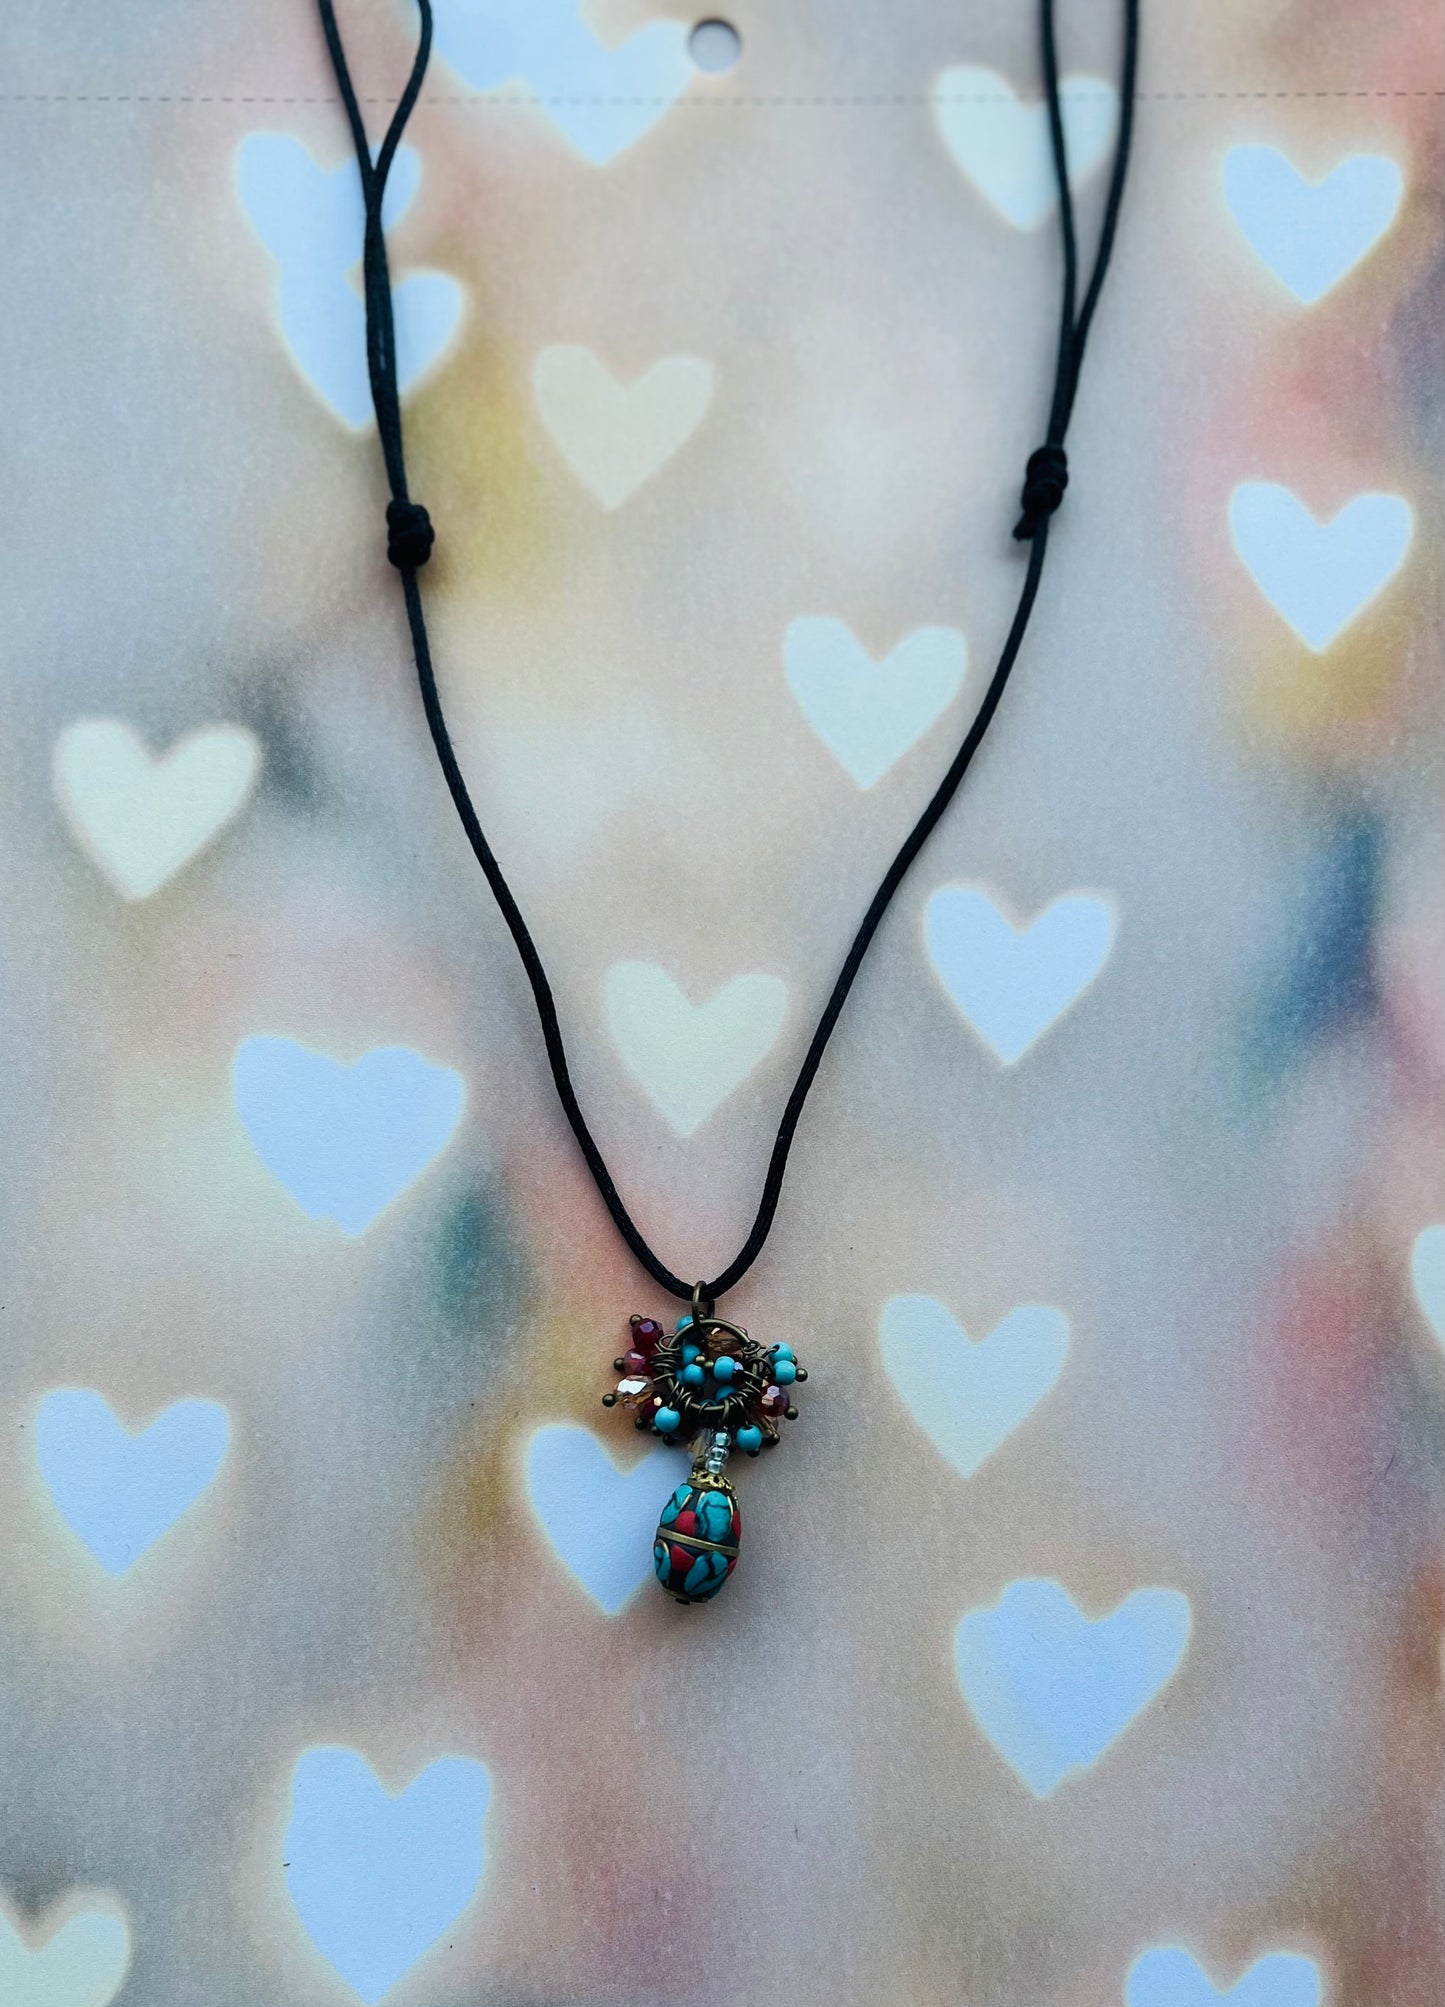 Turquoise & Coral Pendant Necklace